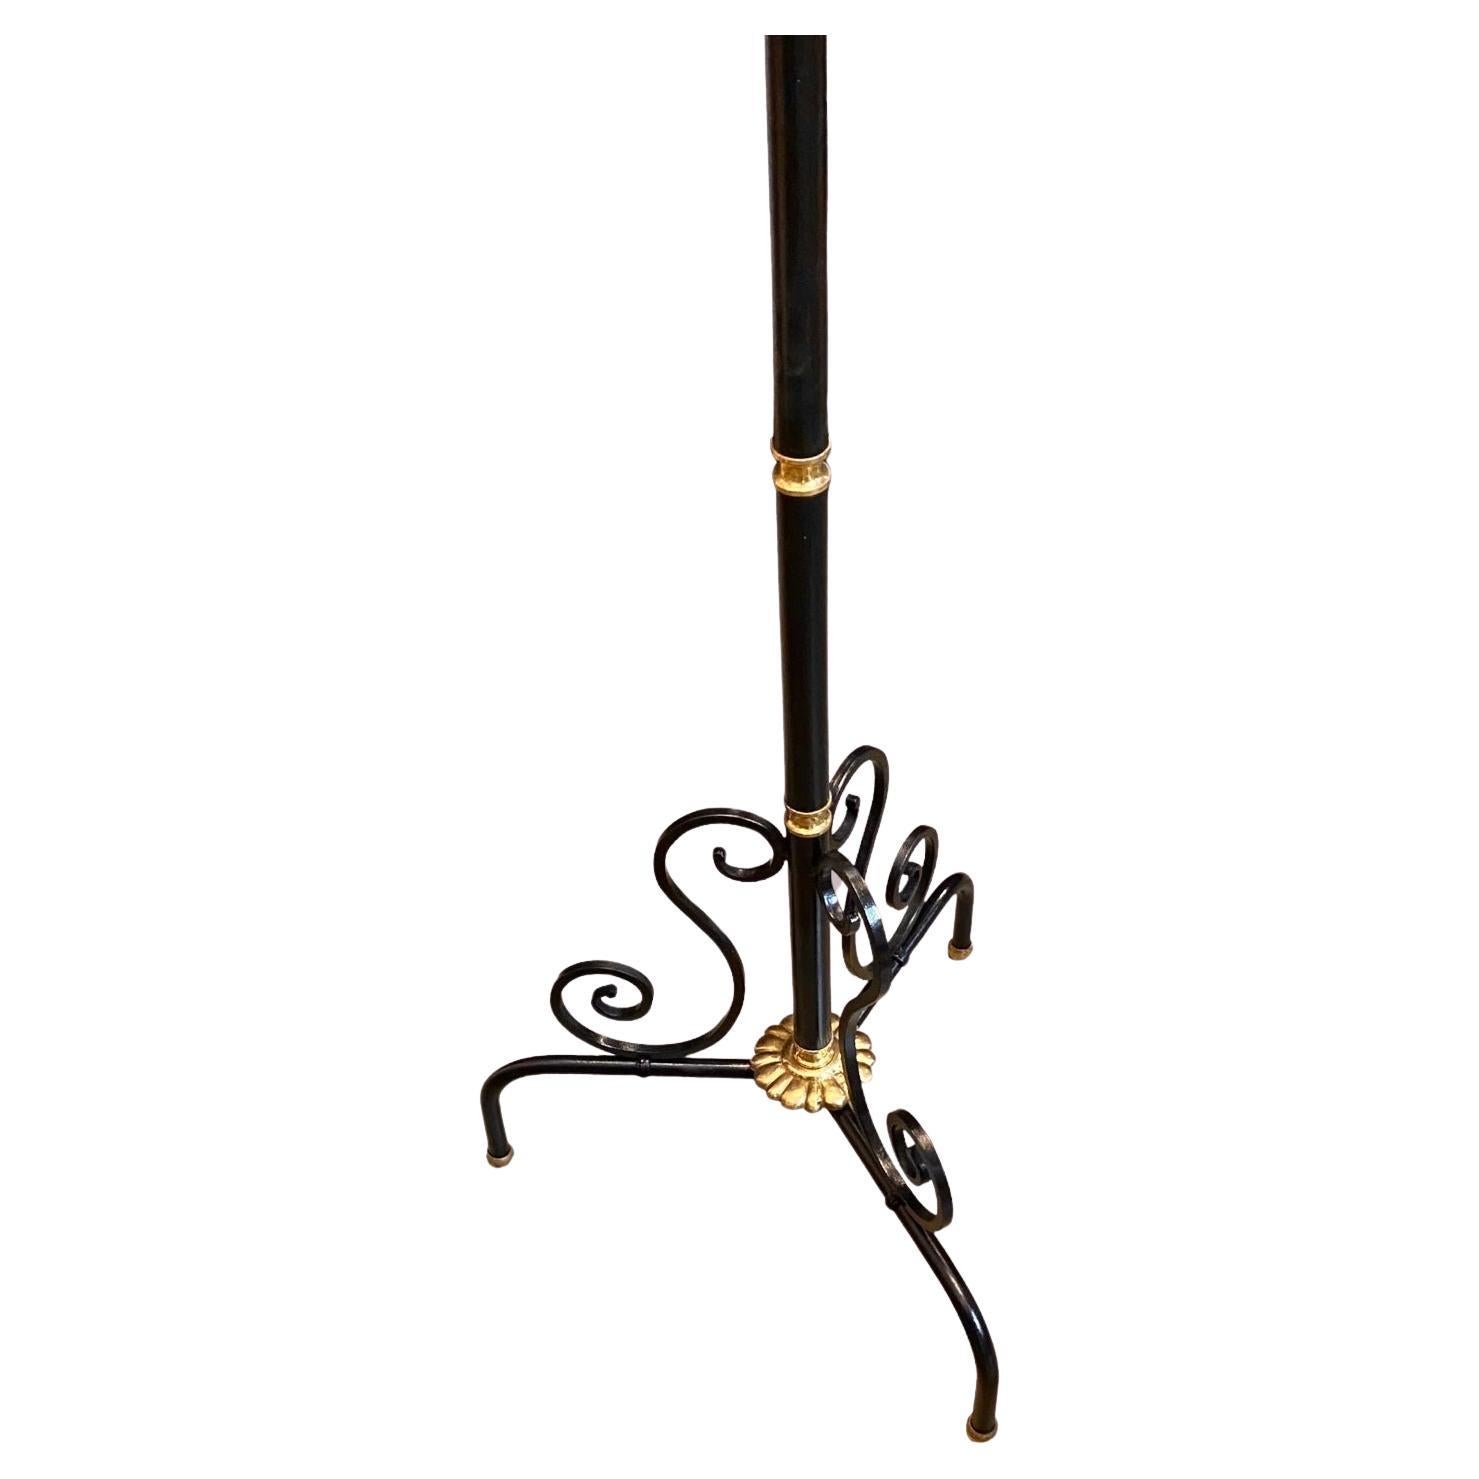 Stunning patinated wrought iron torchiere floor lamp with solid brass details stands on three legs and features three lights with red, black and gold shades. Time earned patina and beautiful detail makes this a statement piece in any space. 